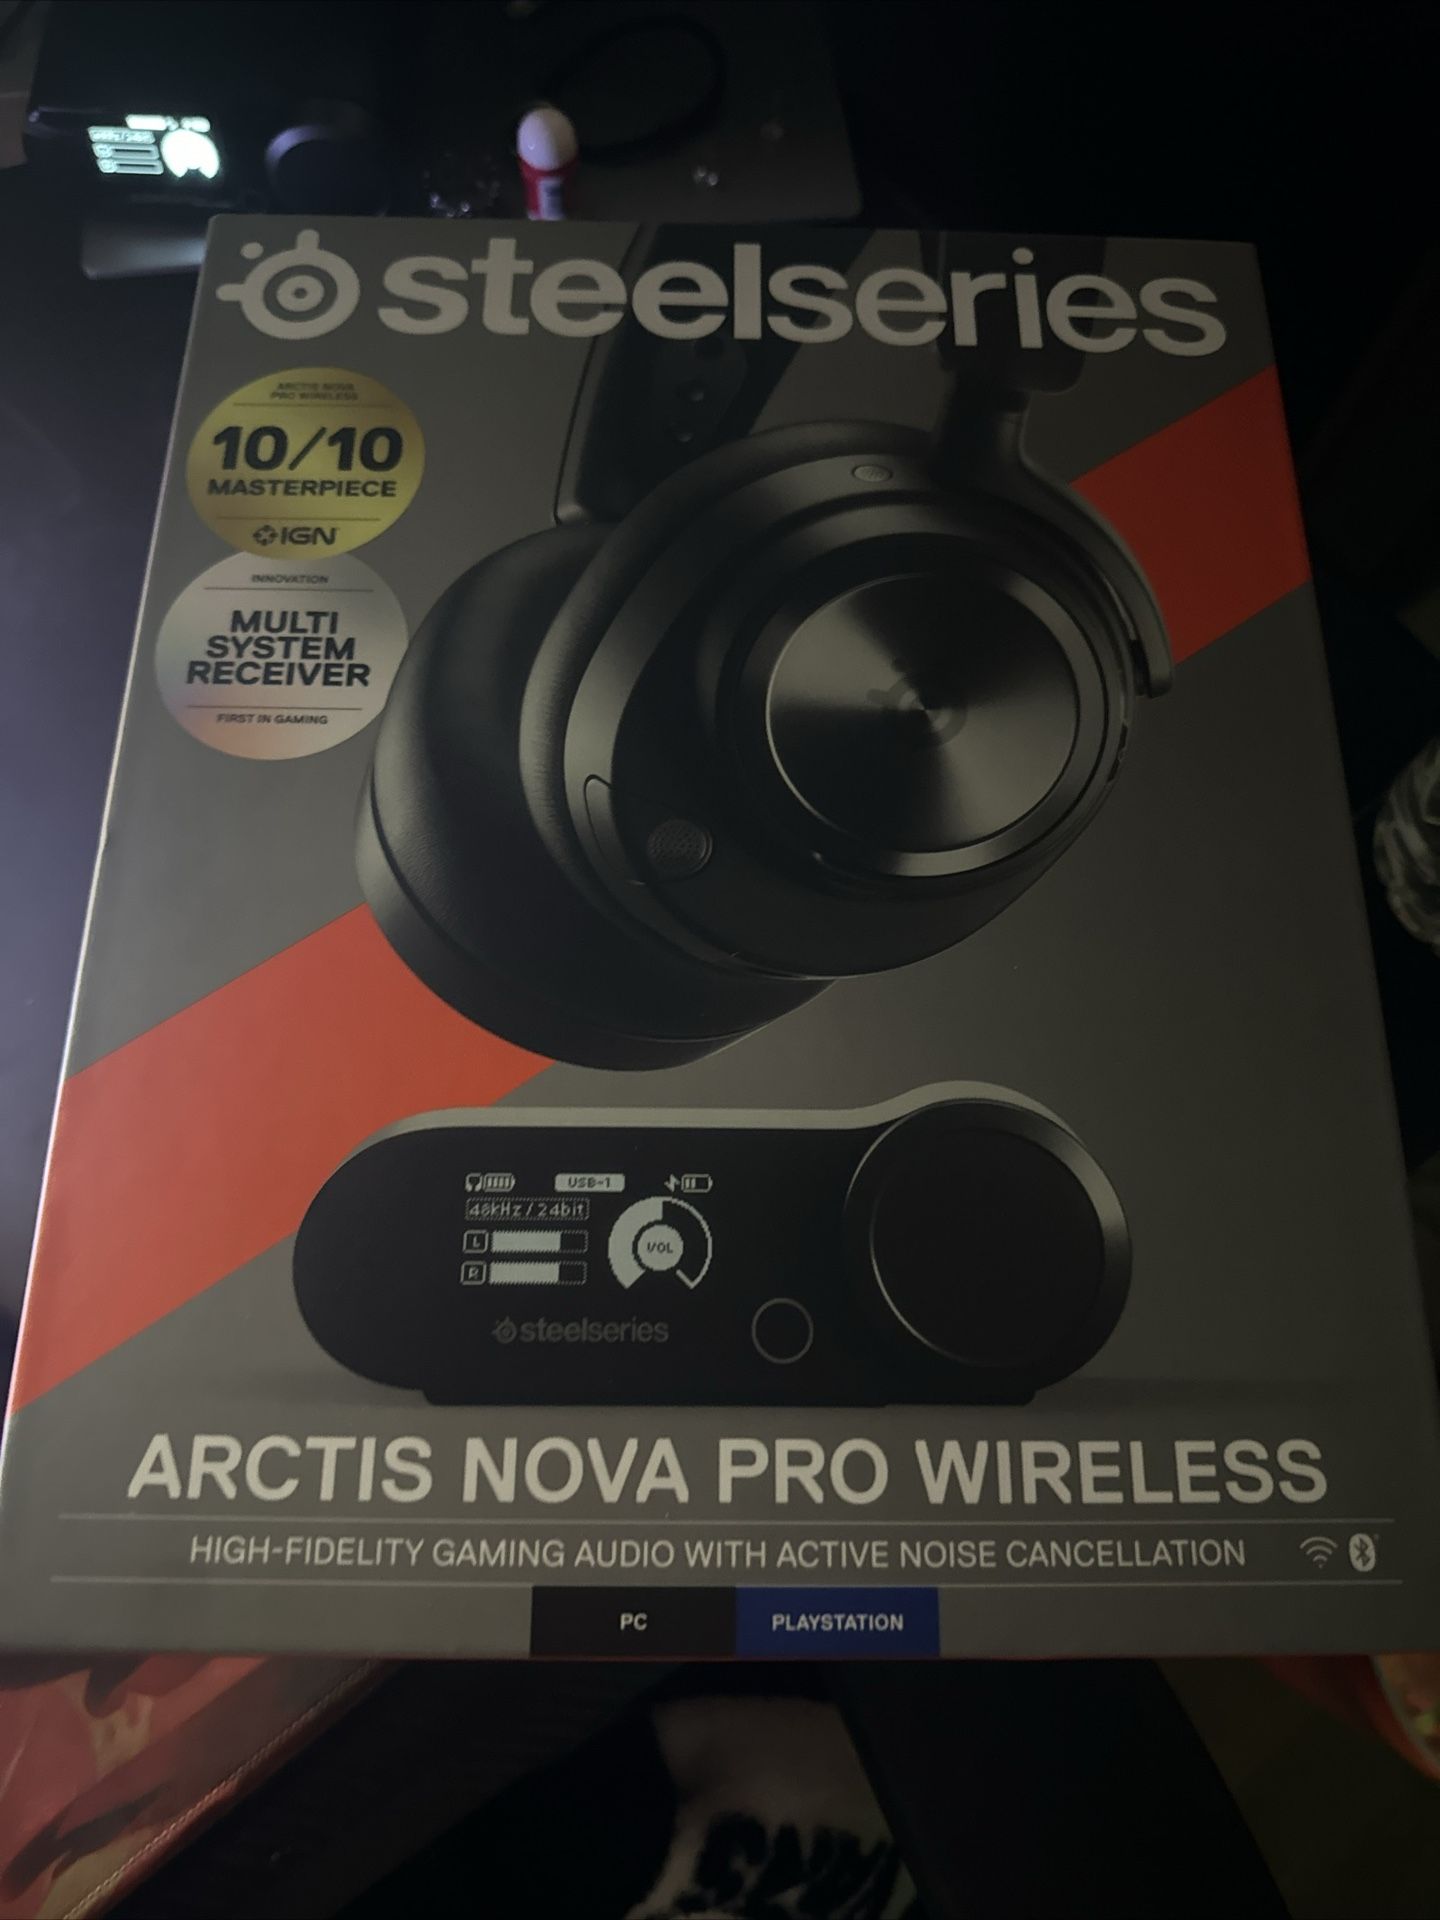 Steelseries Arctis Nova Pro Wireless ANC PC/Playstation Not Even Worn Once